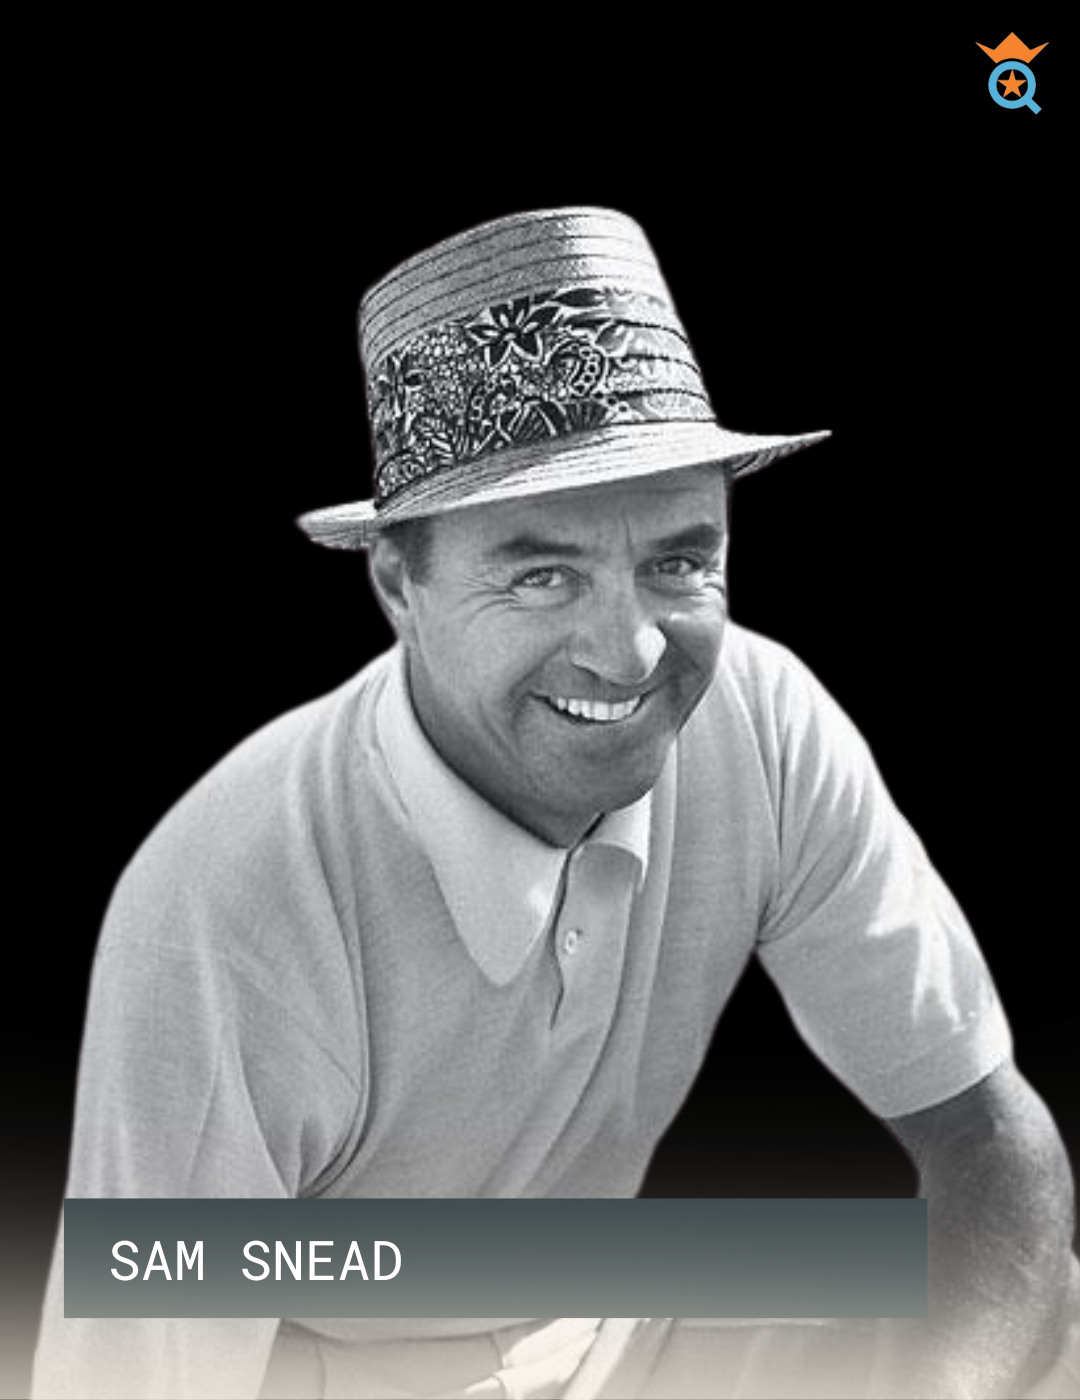 Best Golf Players of All Time, Sam Snead